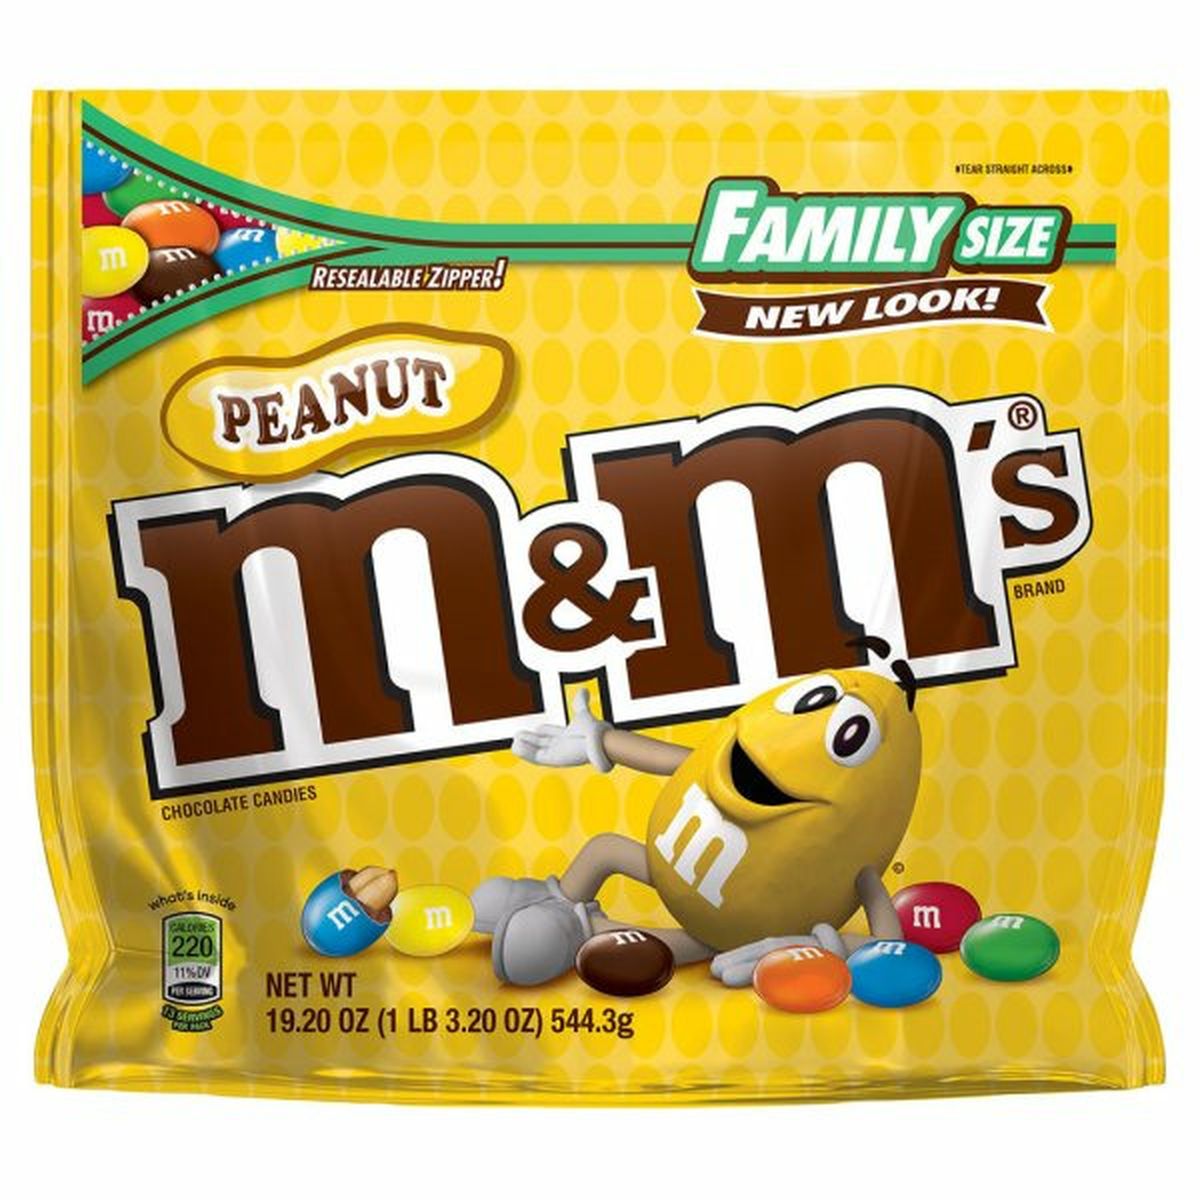 Calories in M&M's Chocolate Candies, Peanut, Family Size